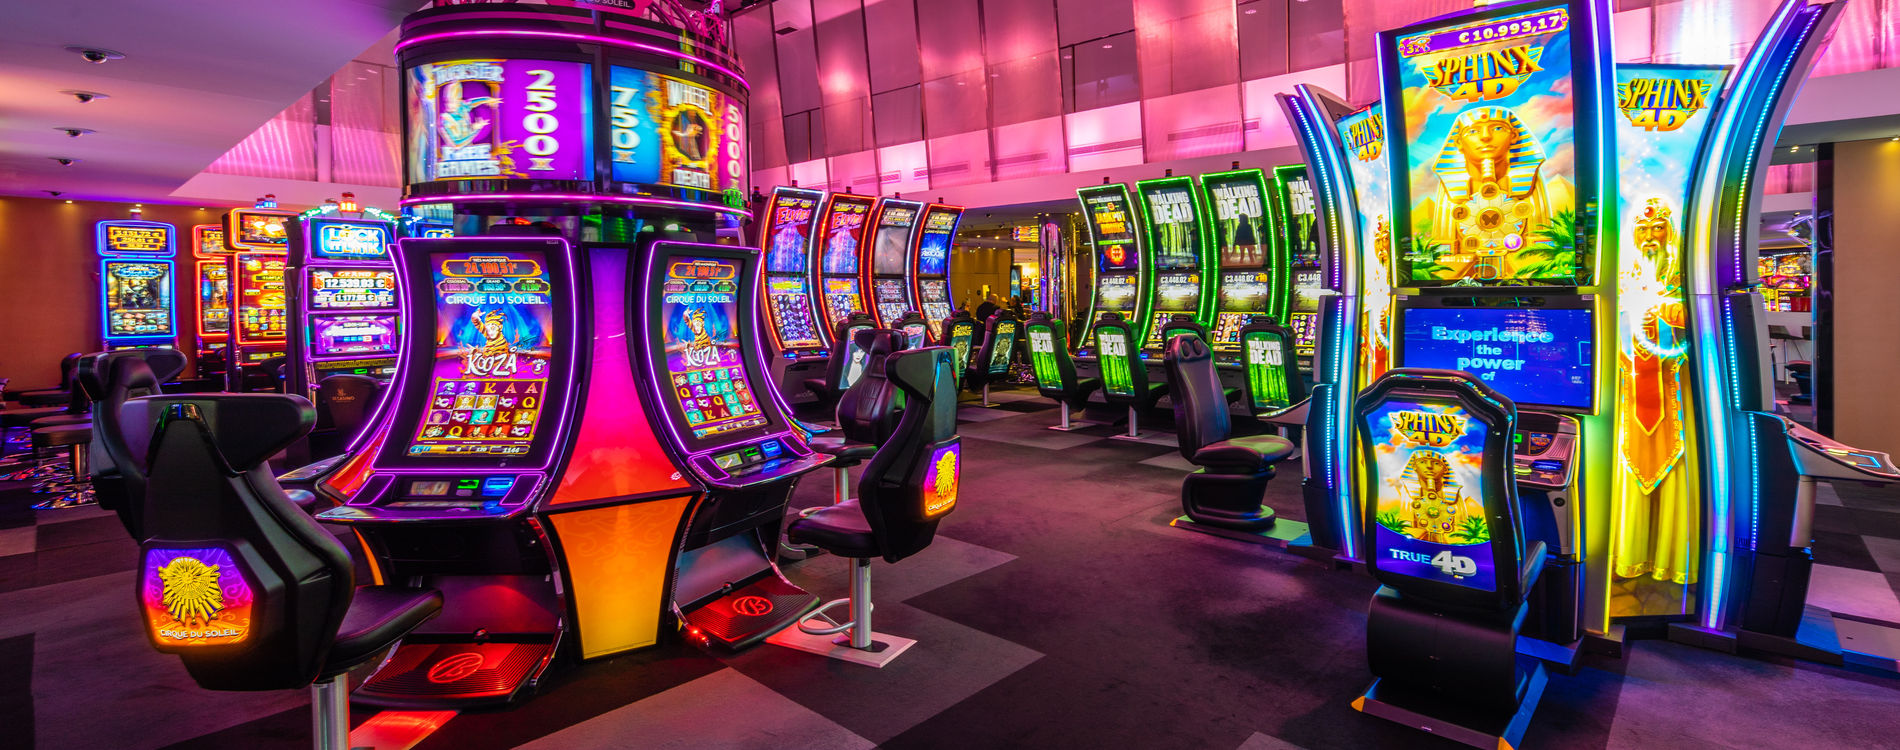 Why should you consider hiring an agent for online slots?